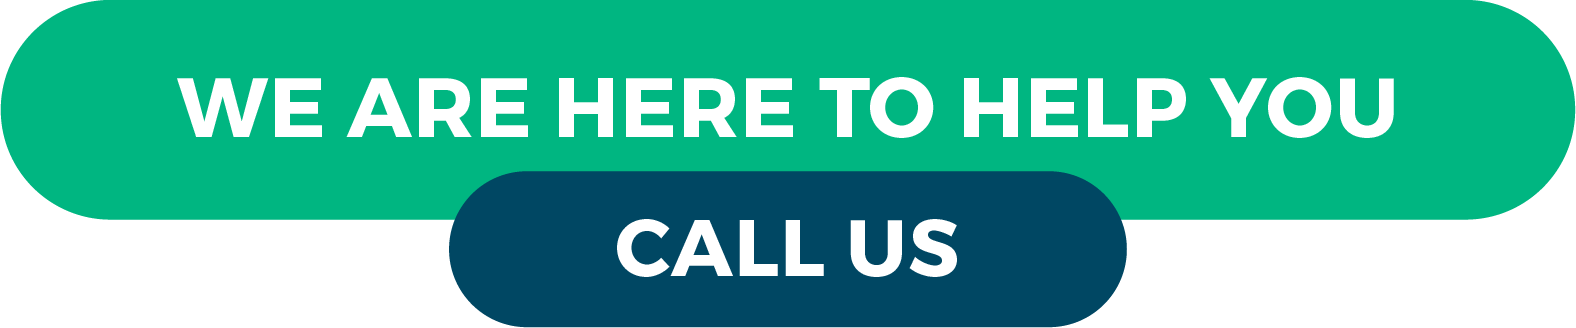 We are here to help you - Call us